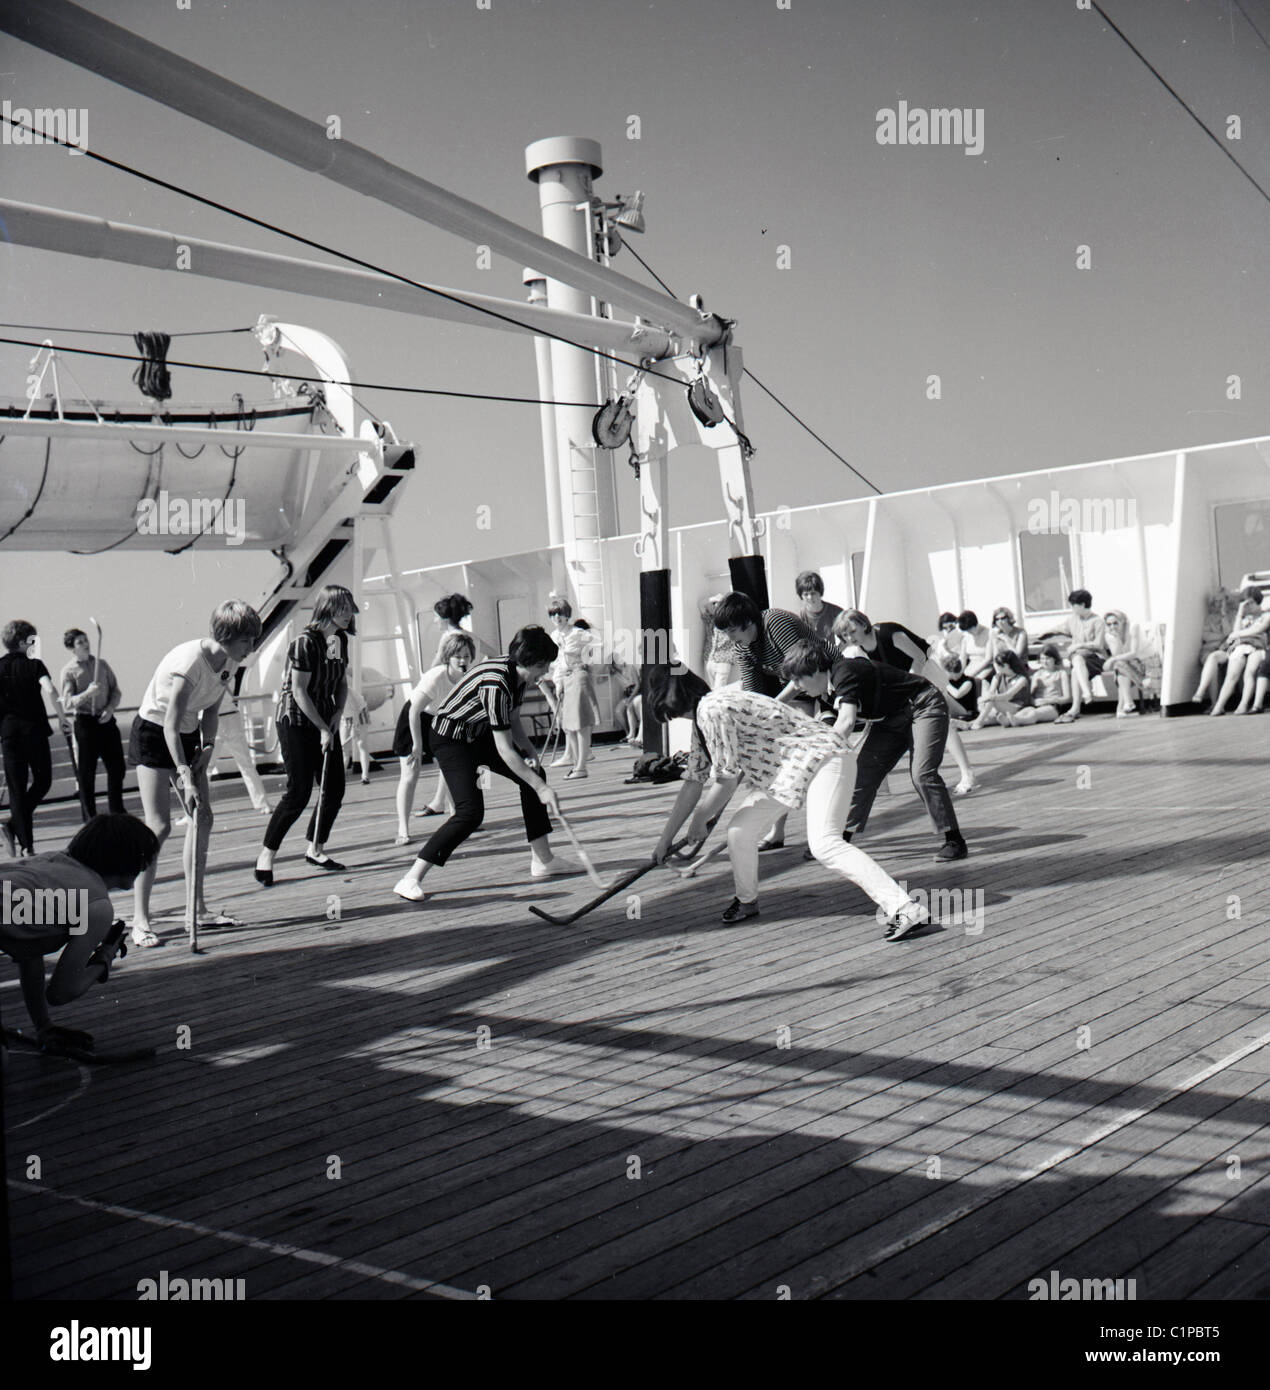 British India cruise liner, 1950s. Passengers playing hockey on the deck of the ship. Stock Photo